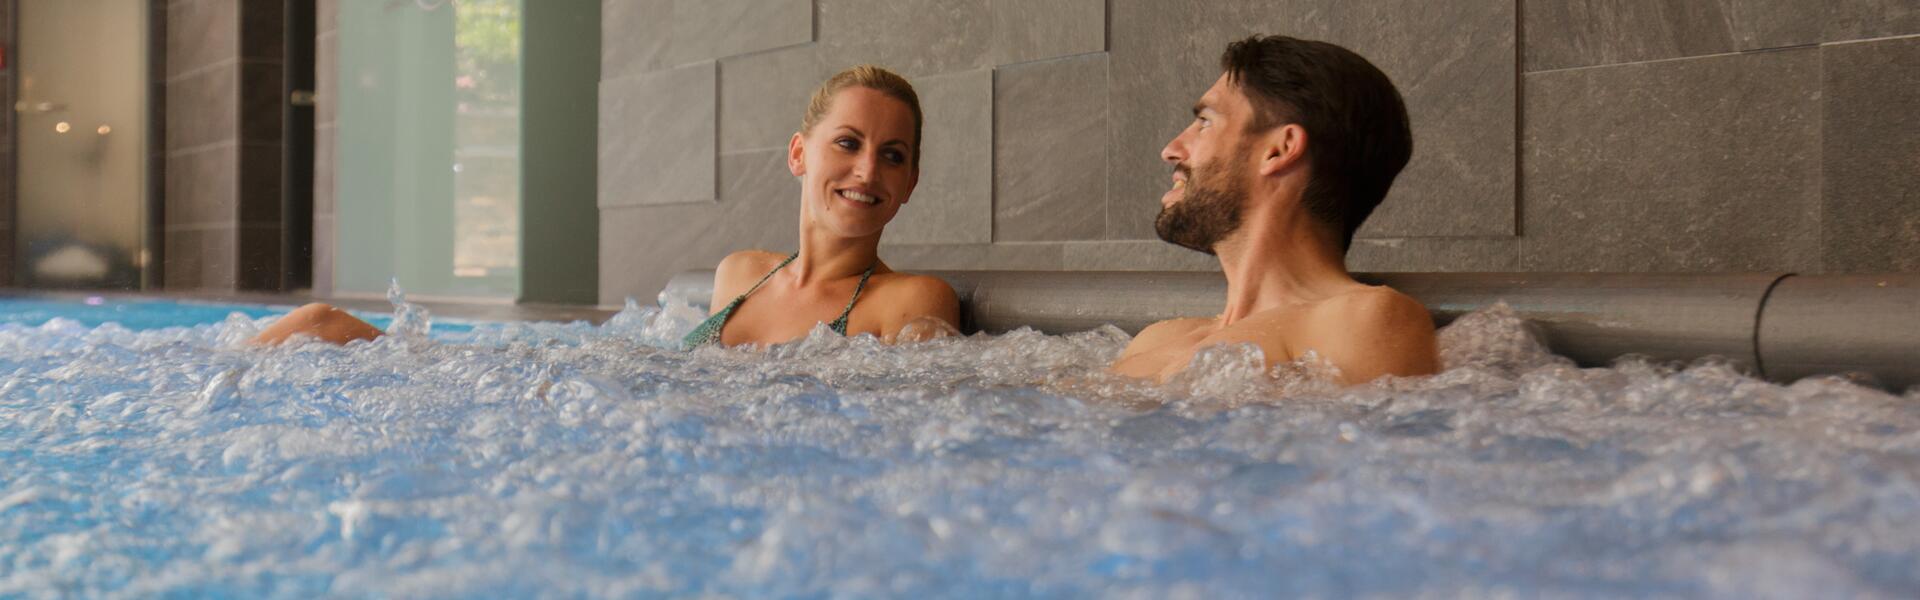 couple in the indoor pool